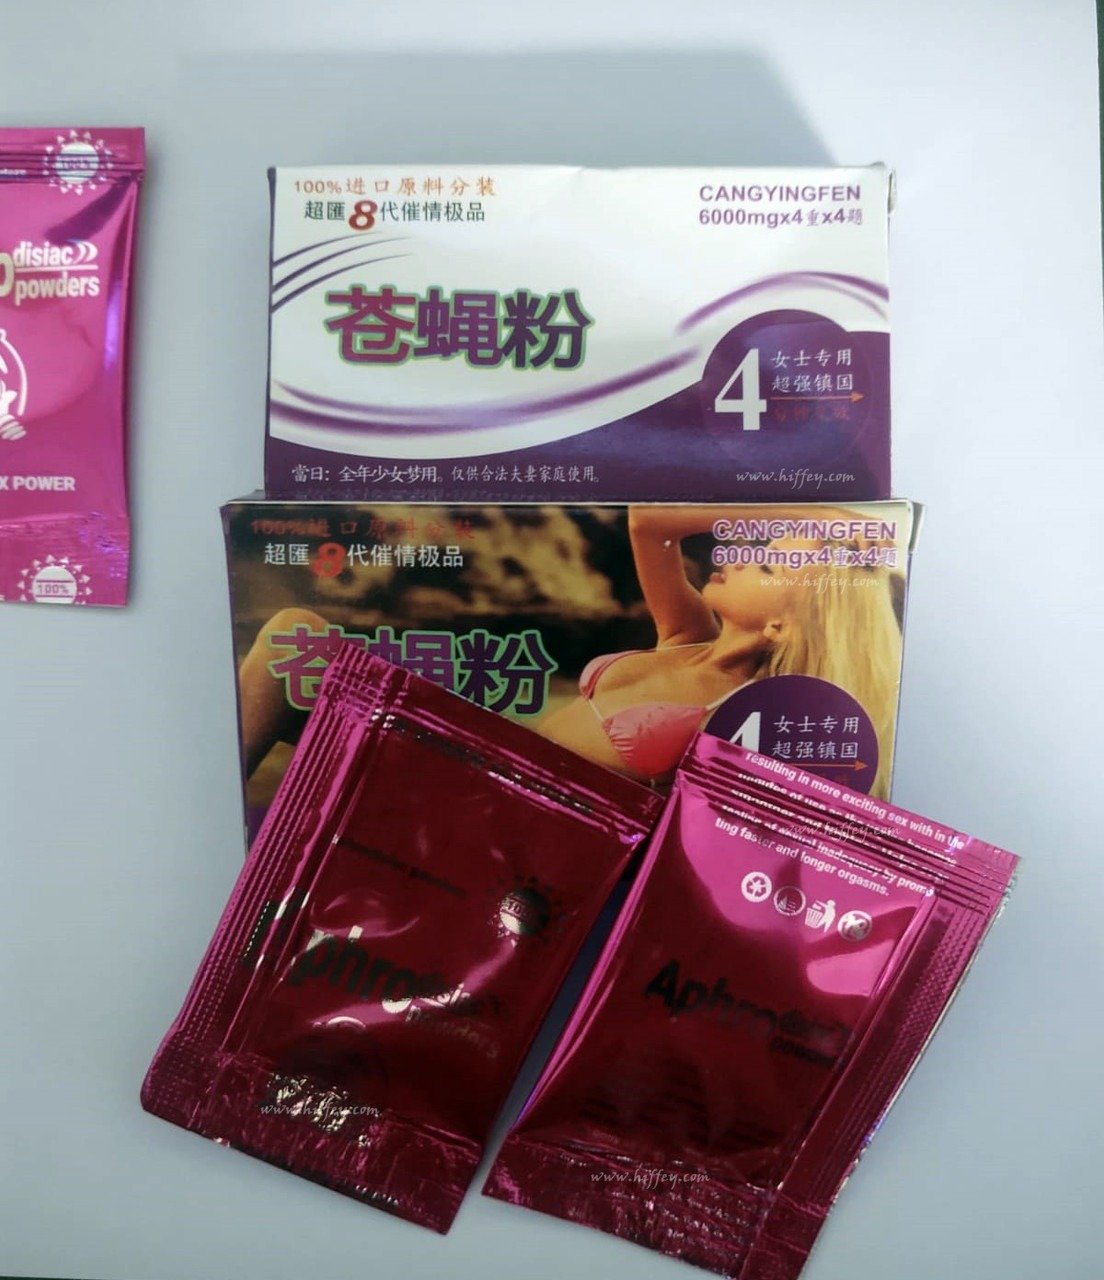 Buy Organic Aphrodisiacs Sex Powder For Sexual Desire Women at Rs. 3000 from Likeshop.pk